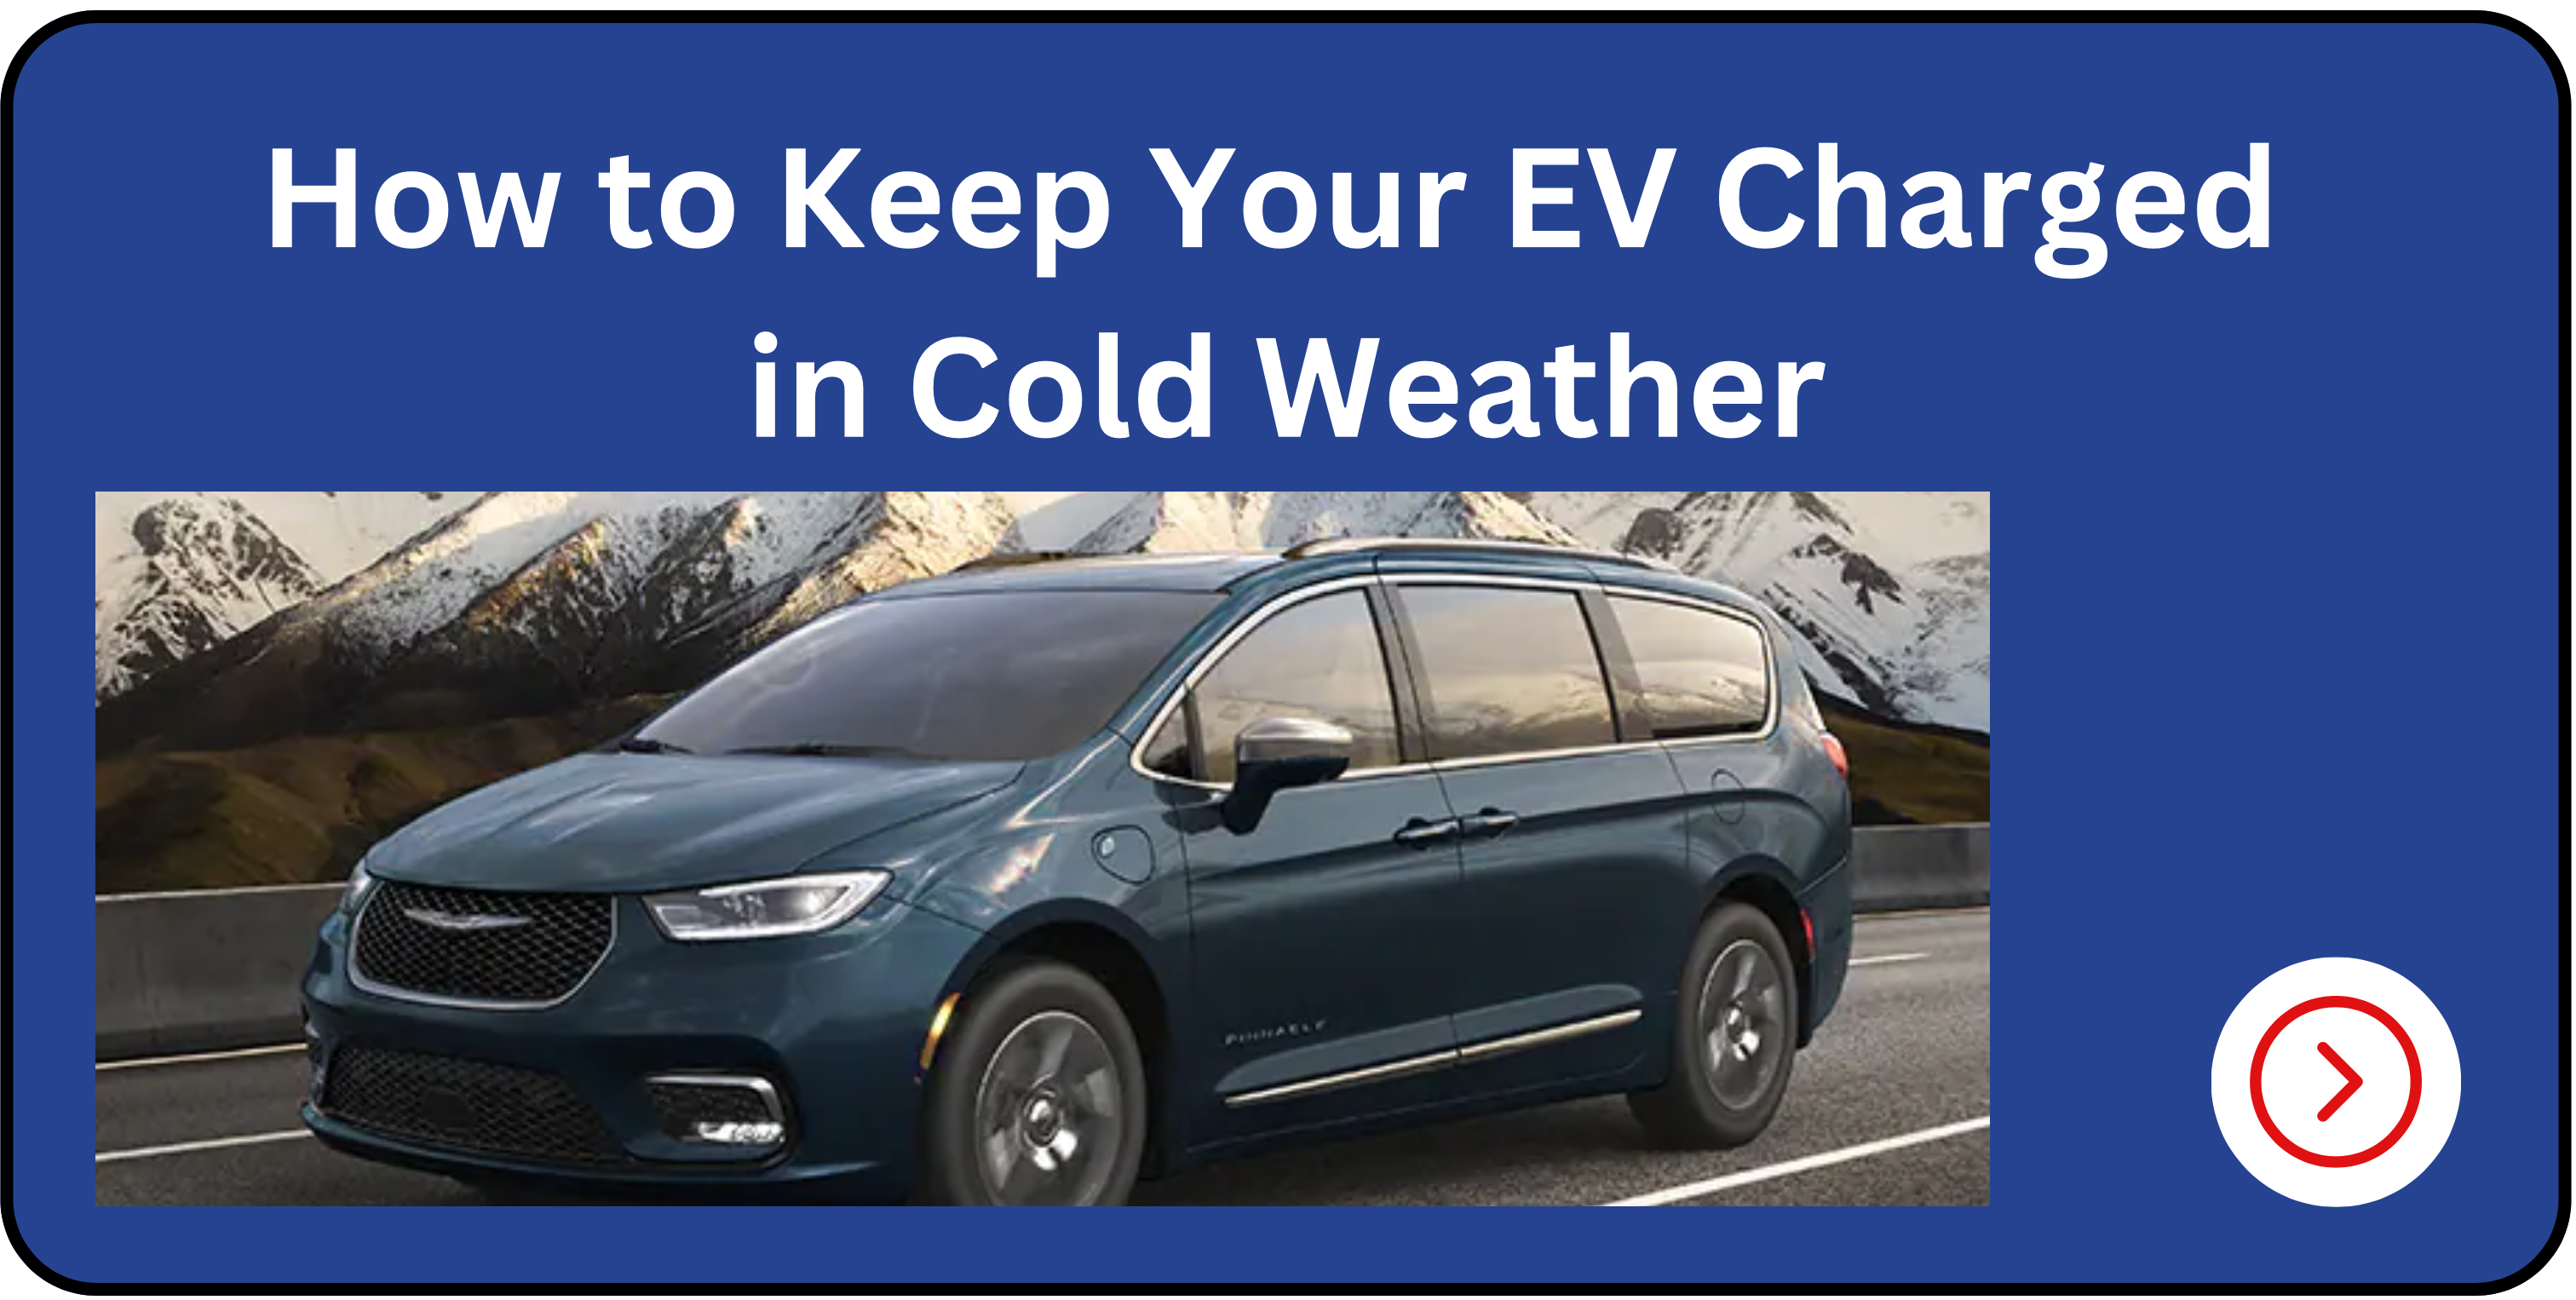 How to Keep Your EV Charged in Cold Weather